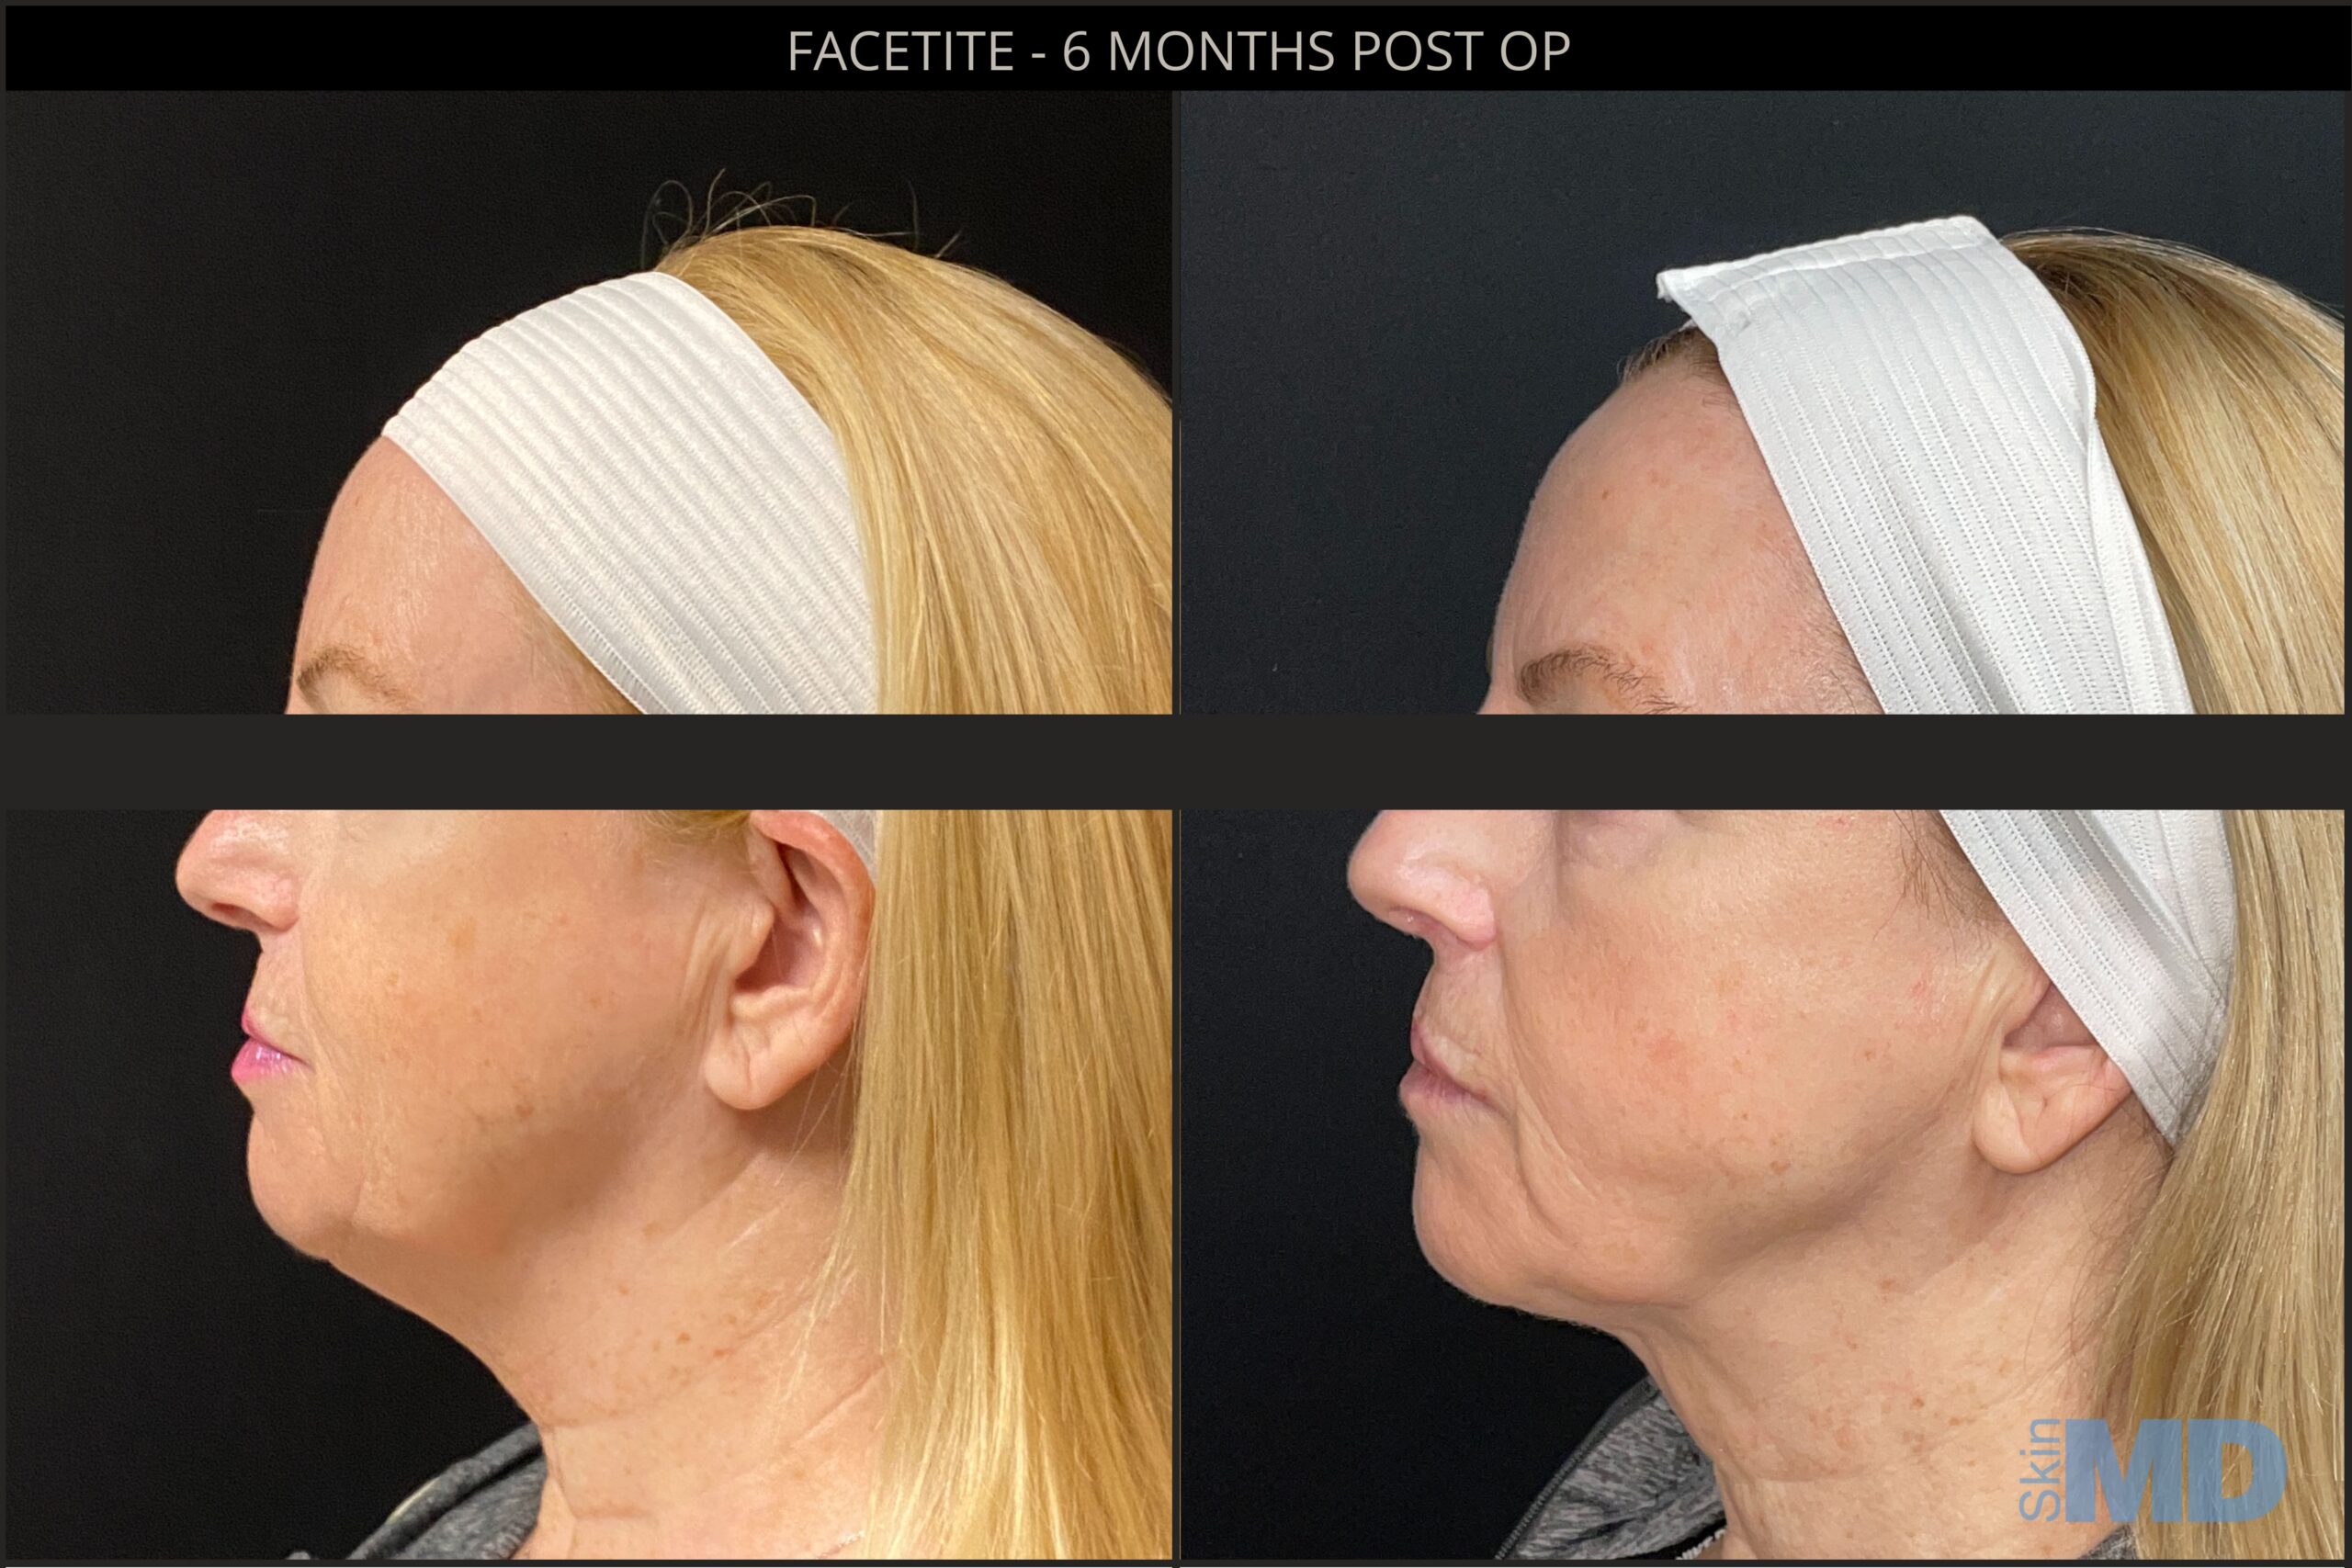 Before and after results for Facetite